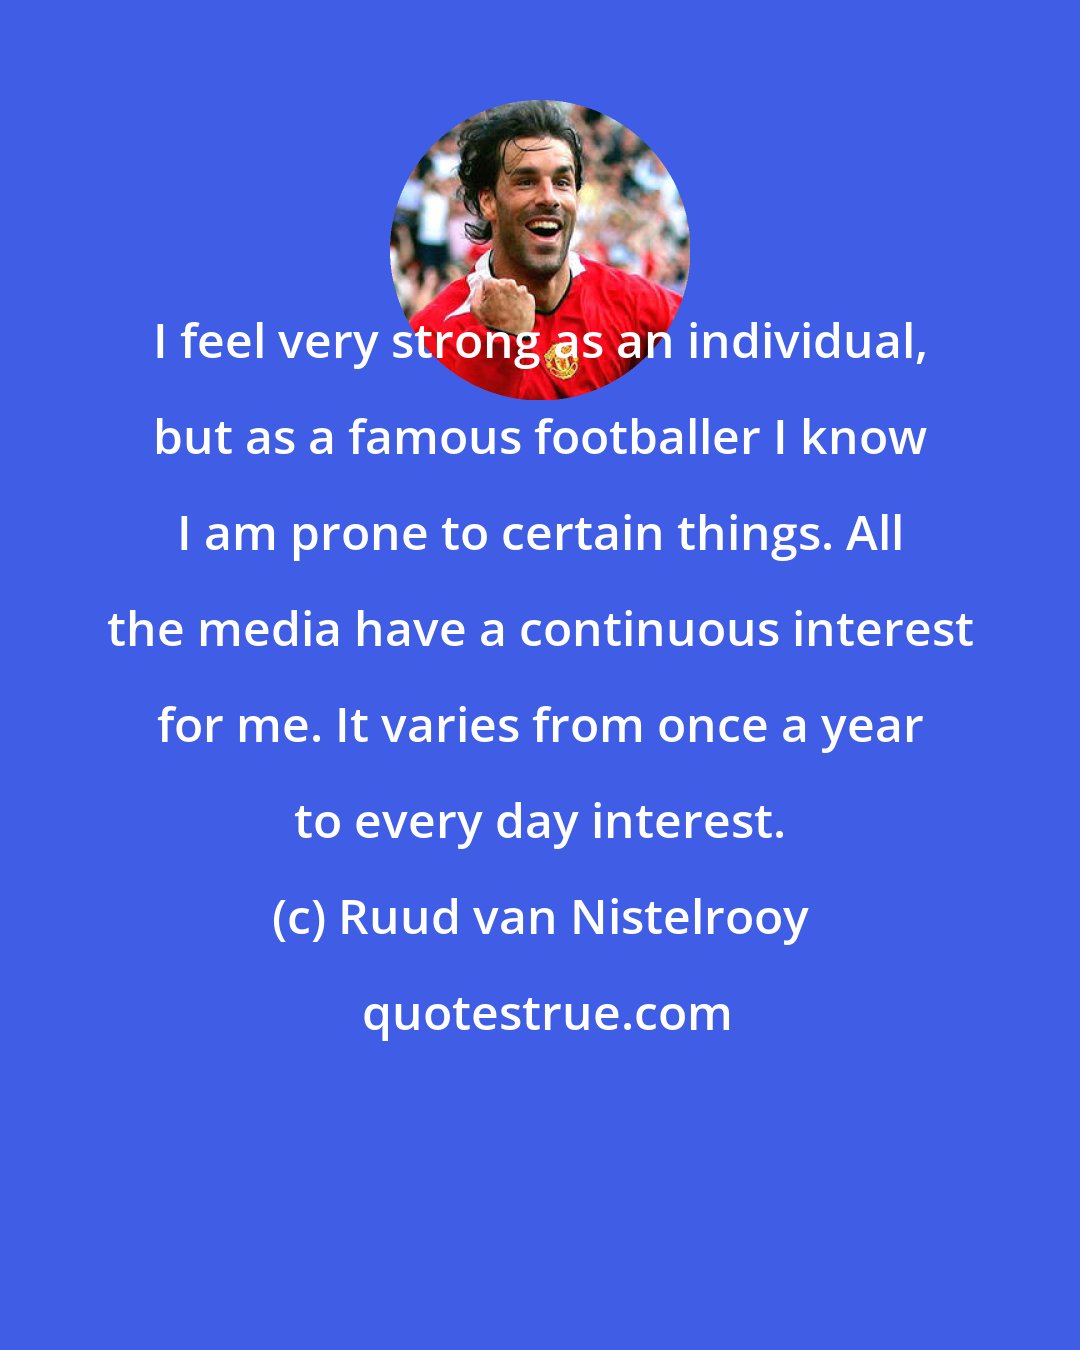 Ruud van Nistelrooy: I feel very strong as an individual, but as a famous footballer I know I am prone to certain things. All the media have a continuous interest for me. It varies from once a year to every day interest.